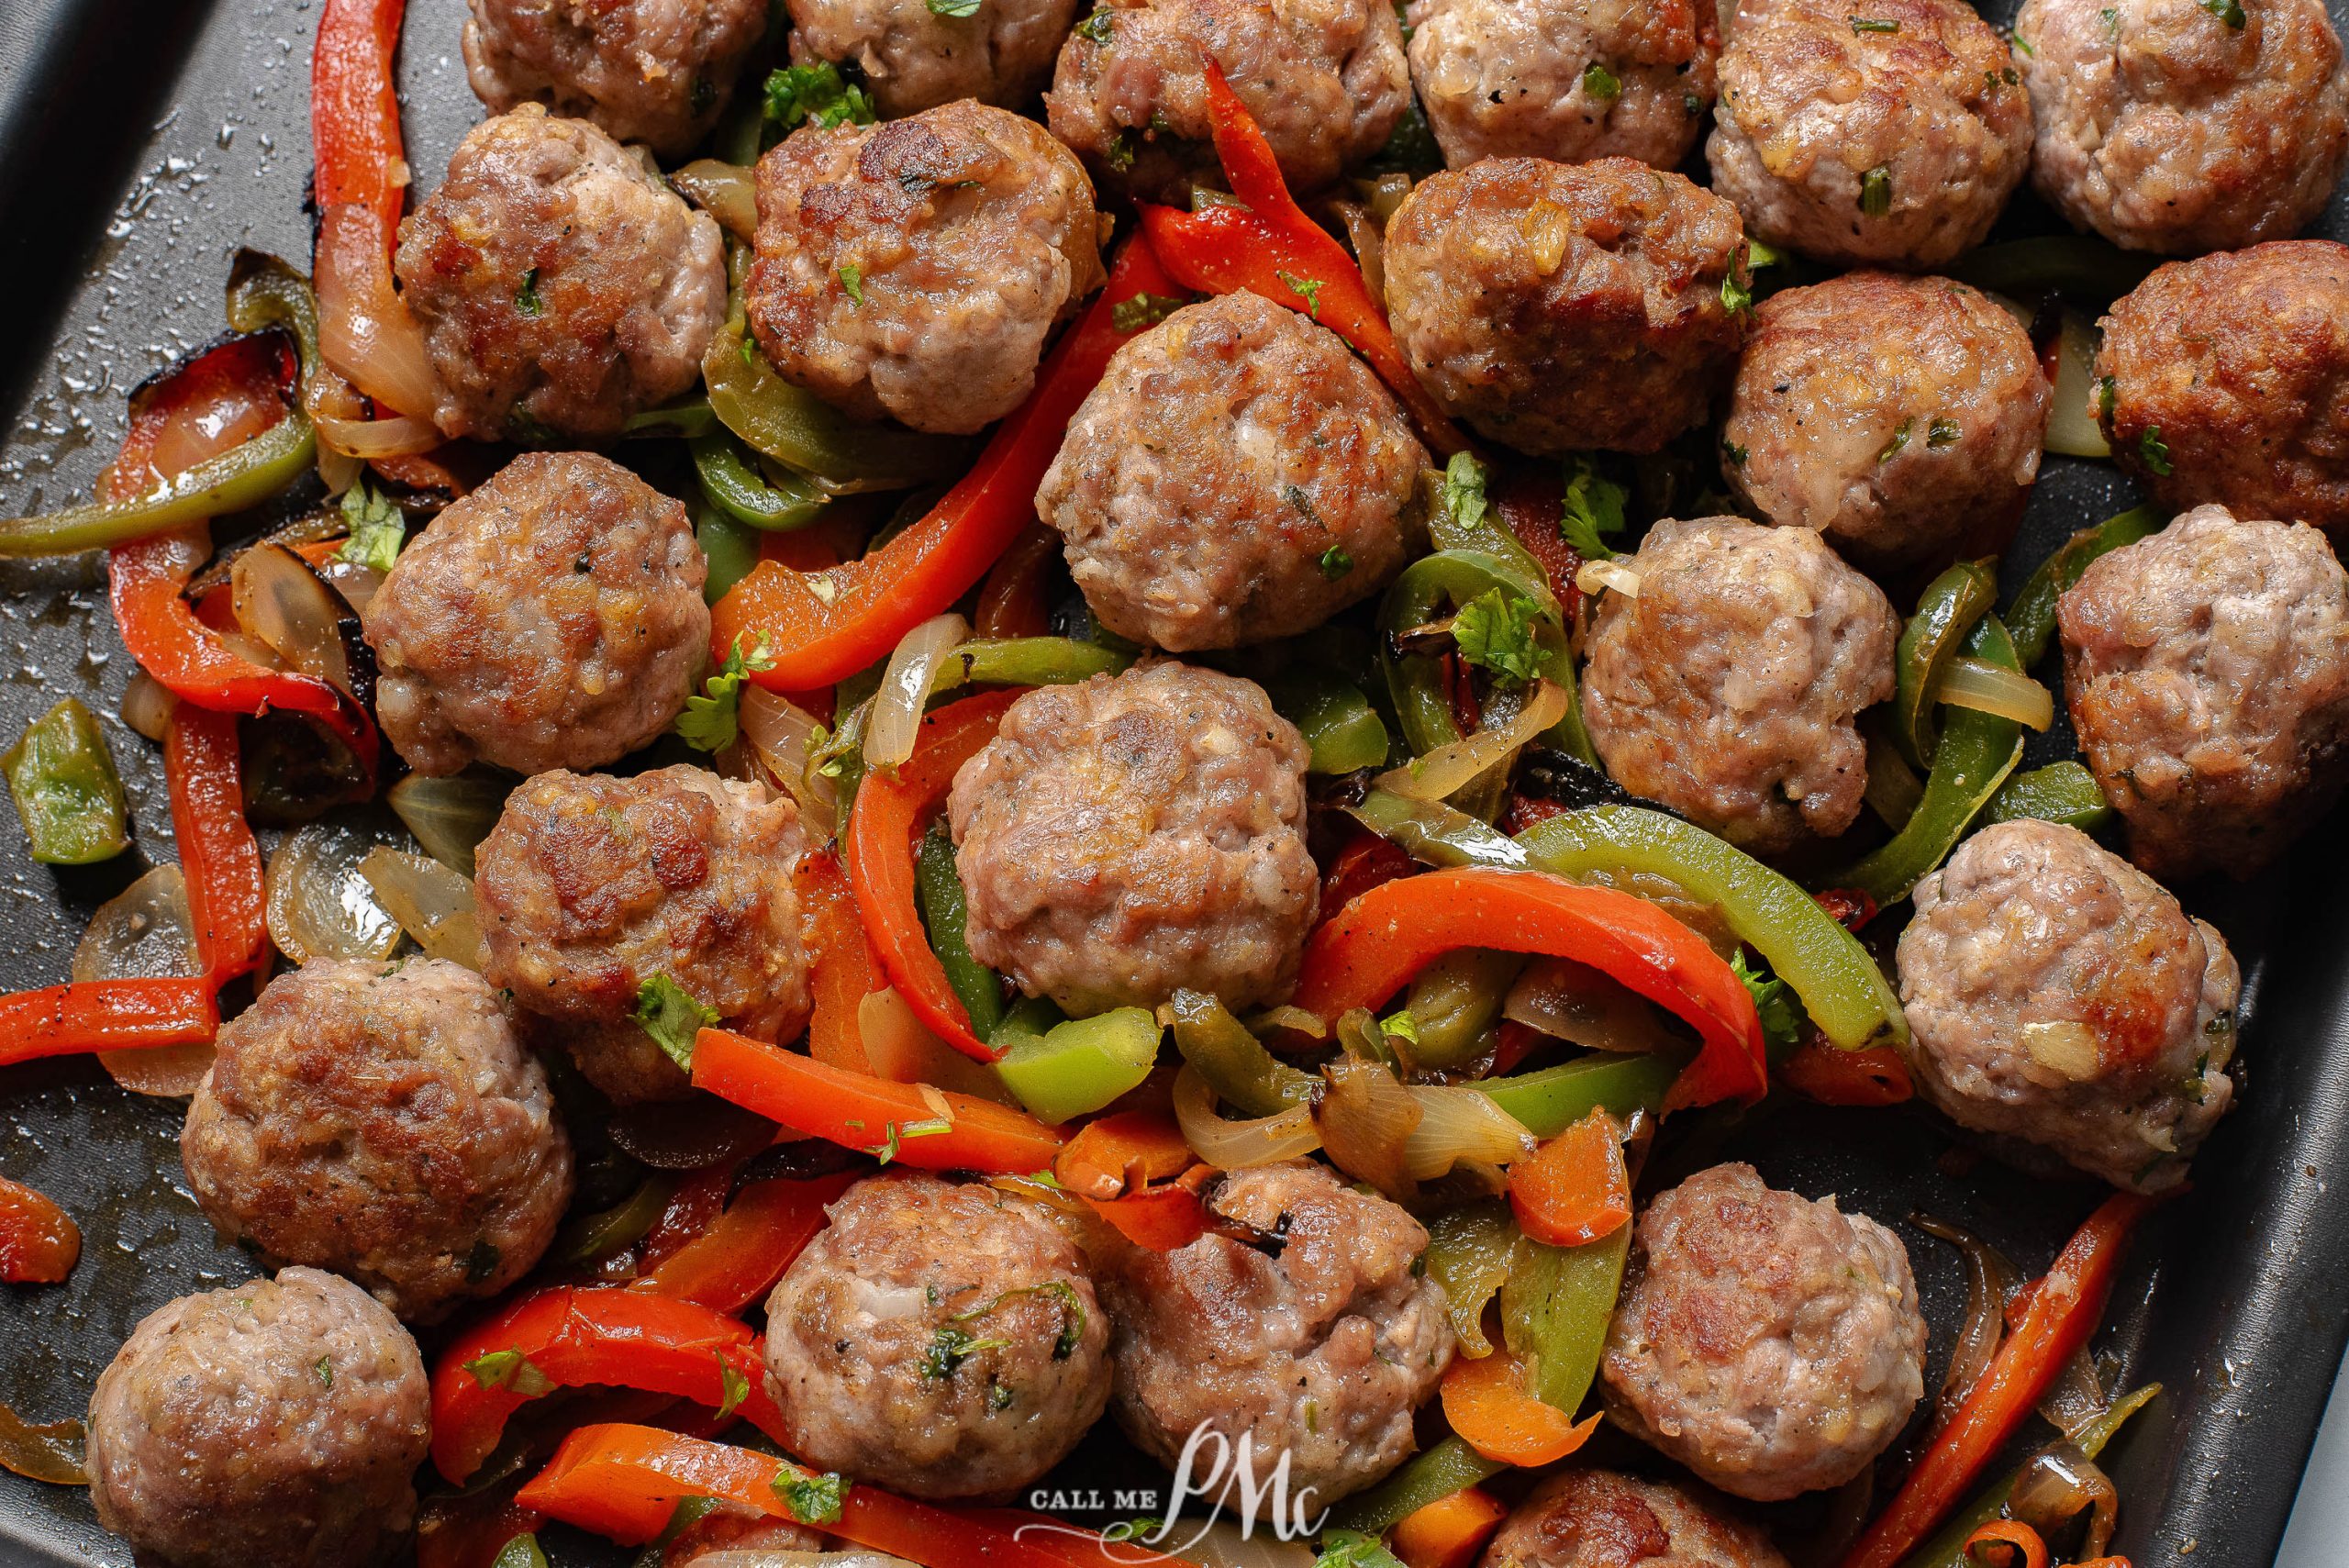 Meat with peppers and onions on a baking sheet.